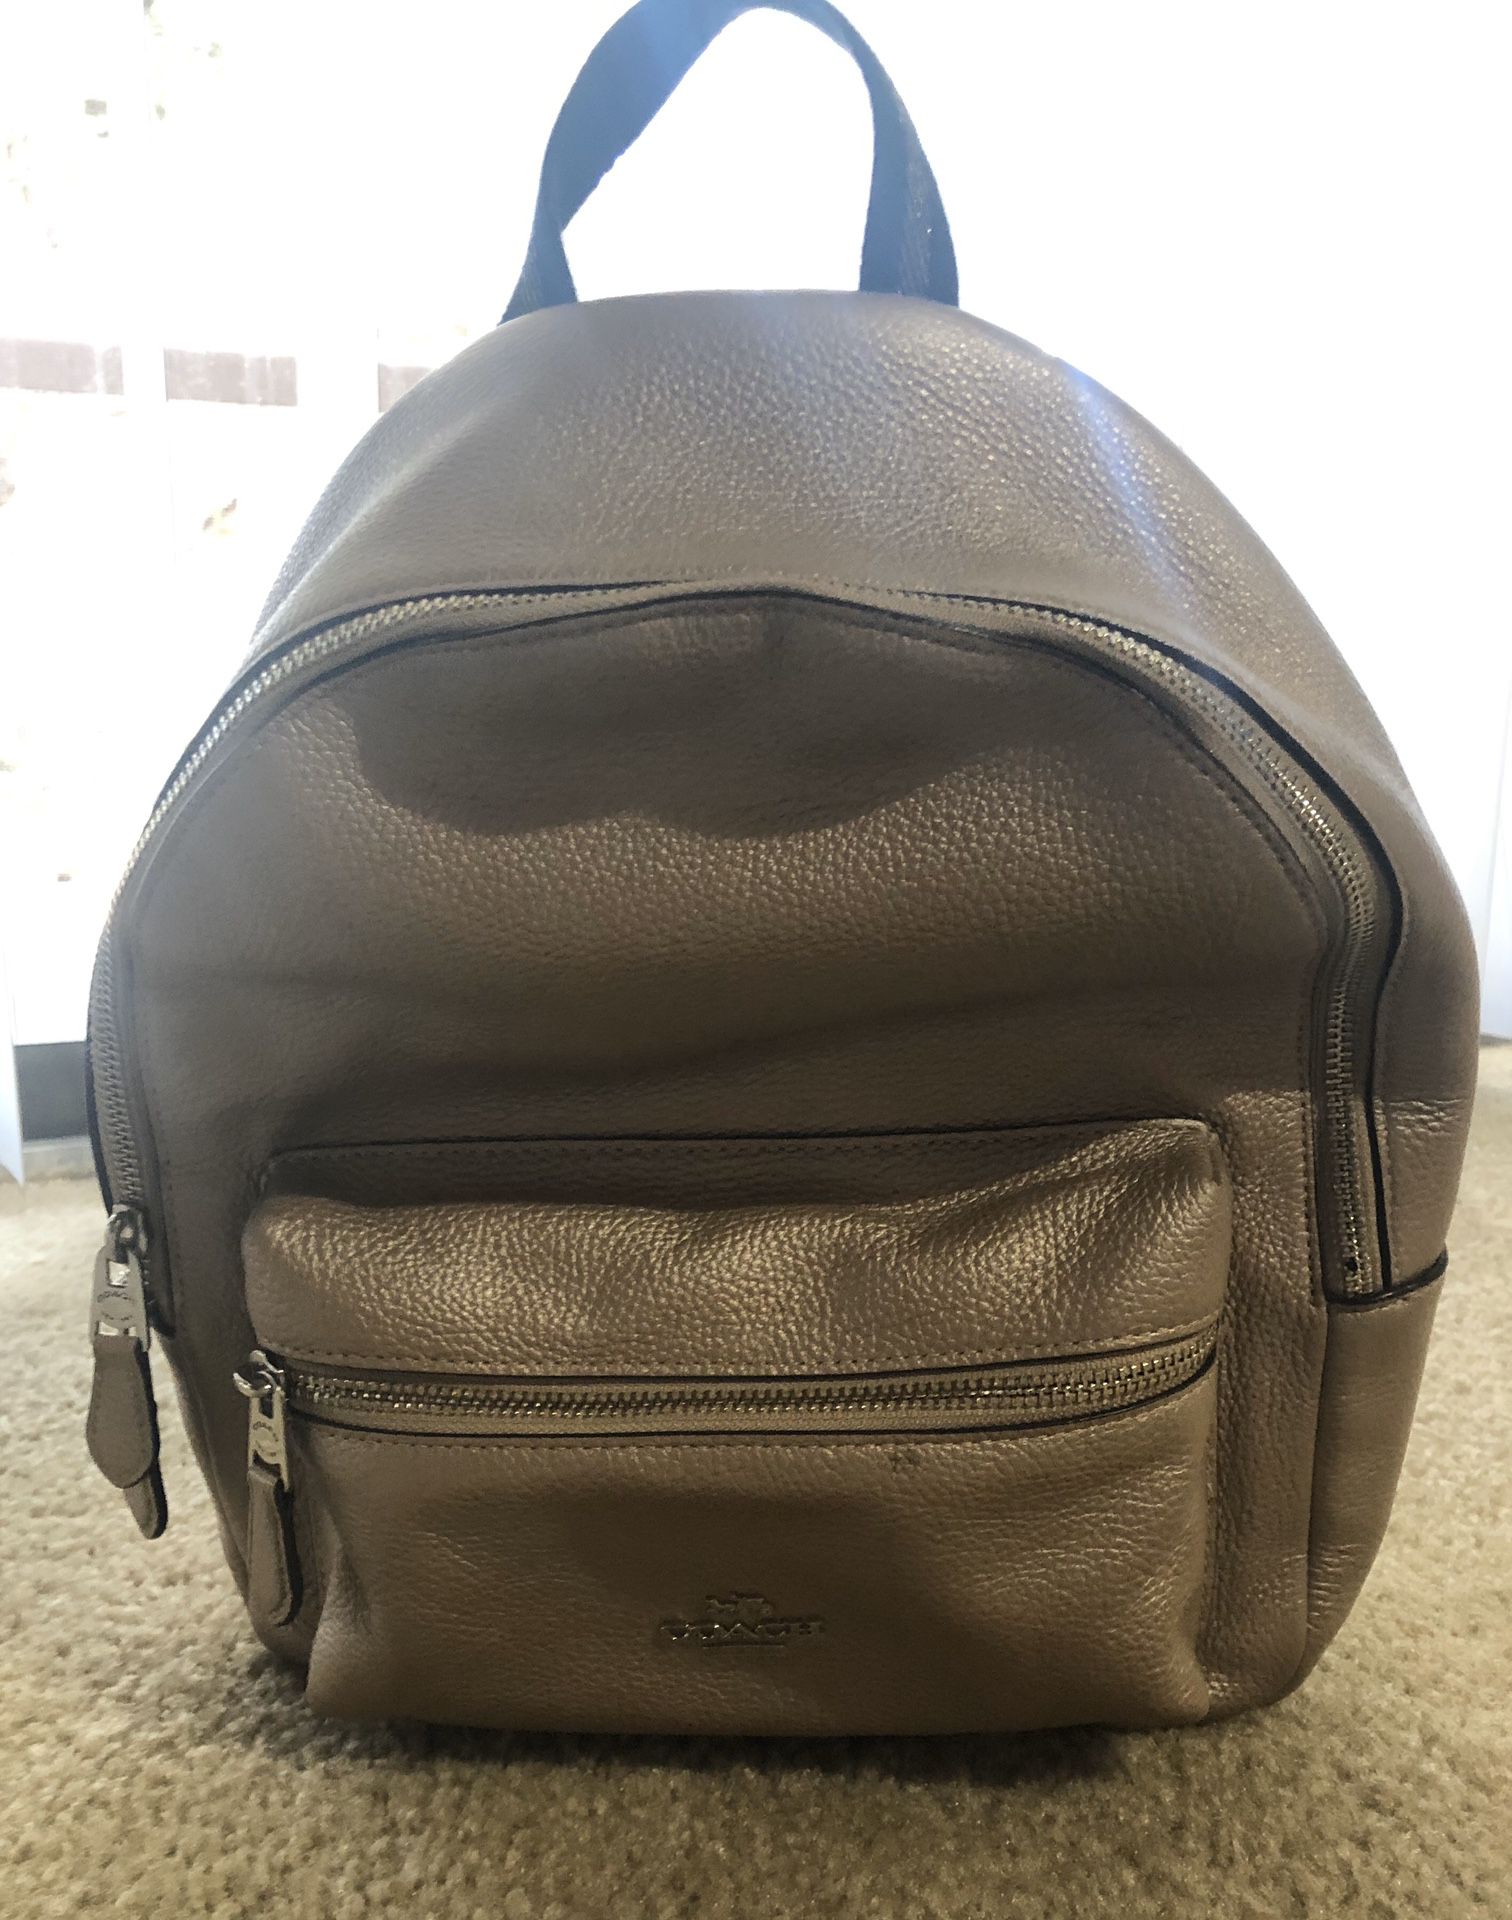 Authentic Coach Backpack Style Purse